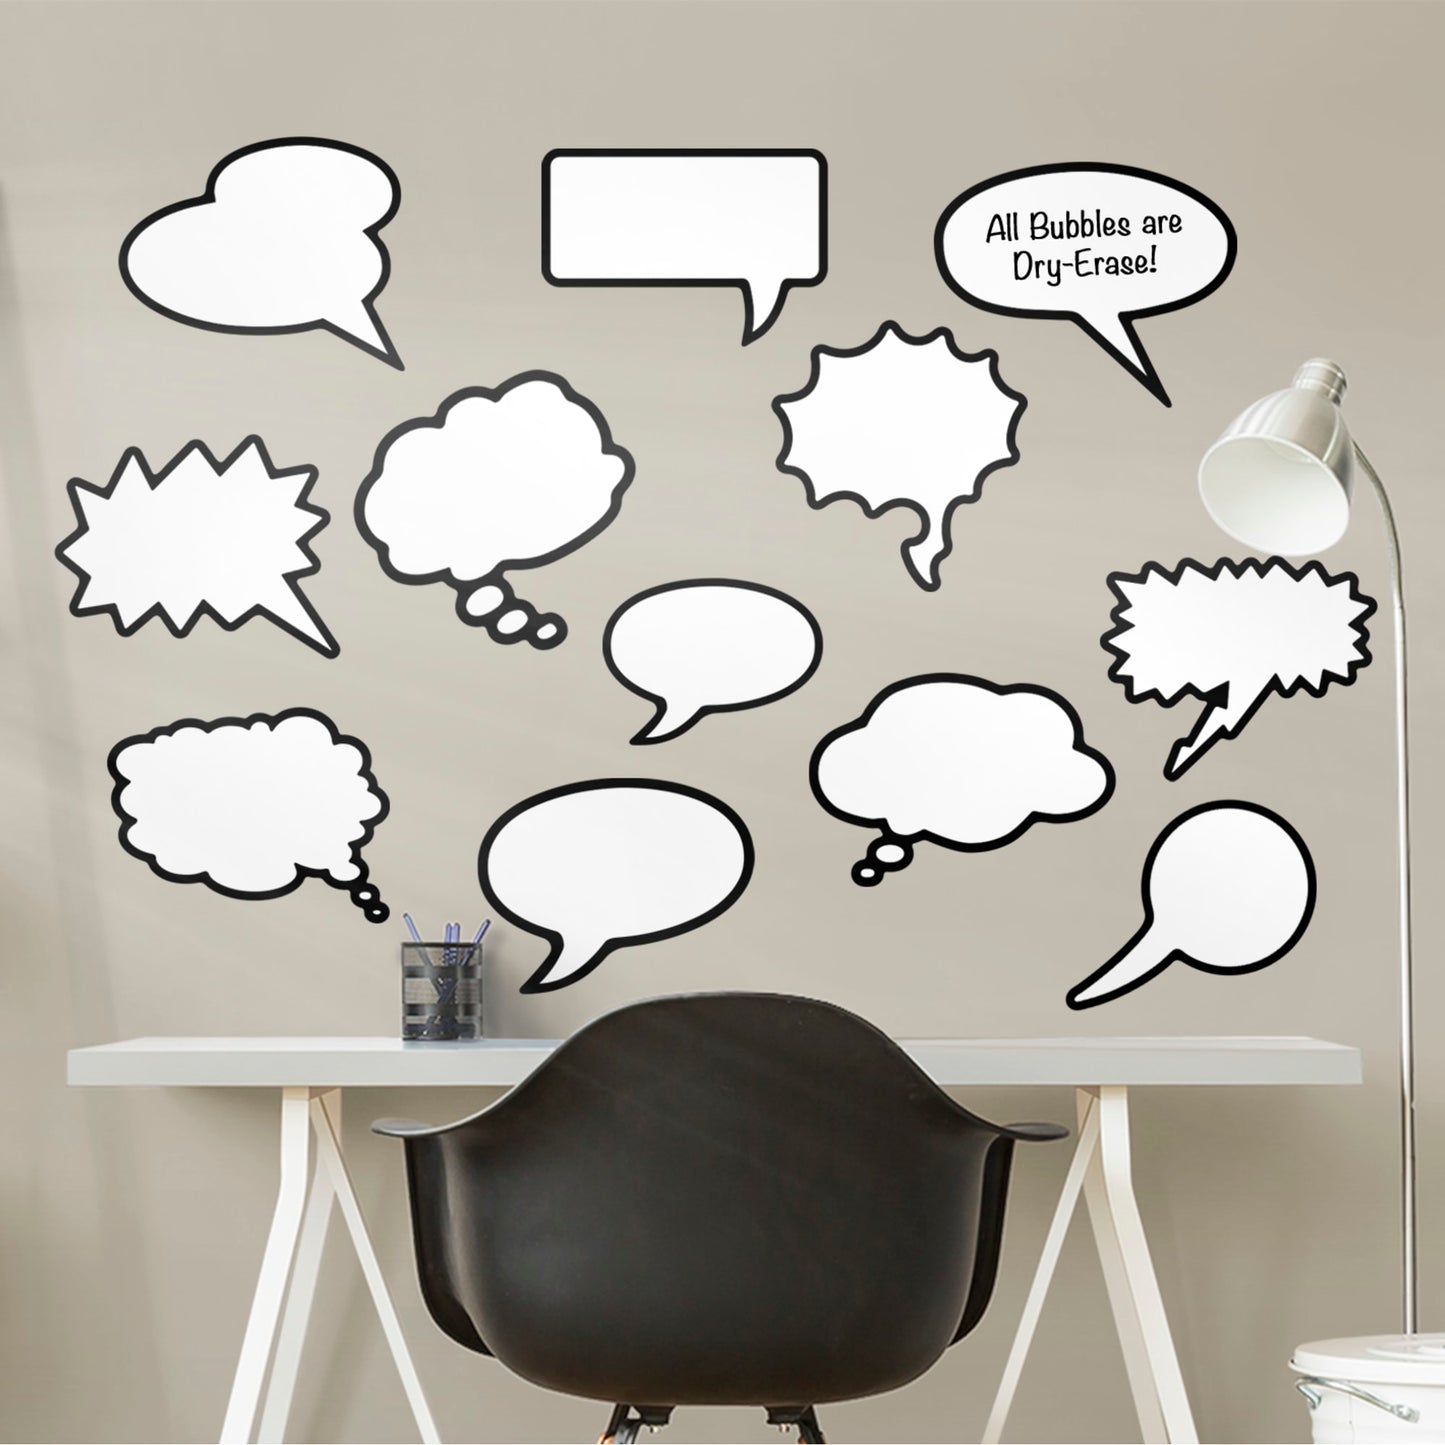 Dry Erase Thought Bubble Wall Decal